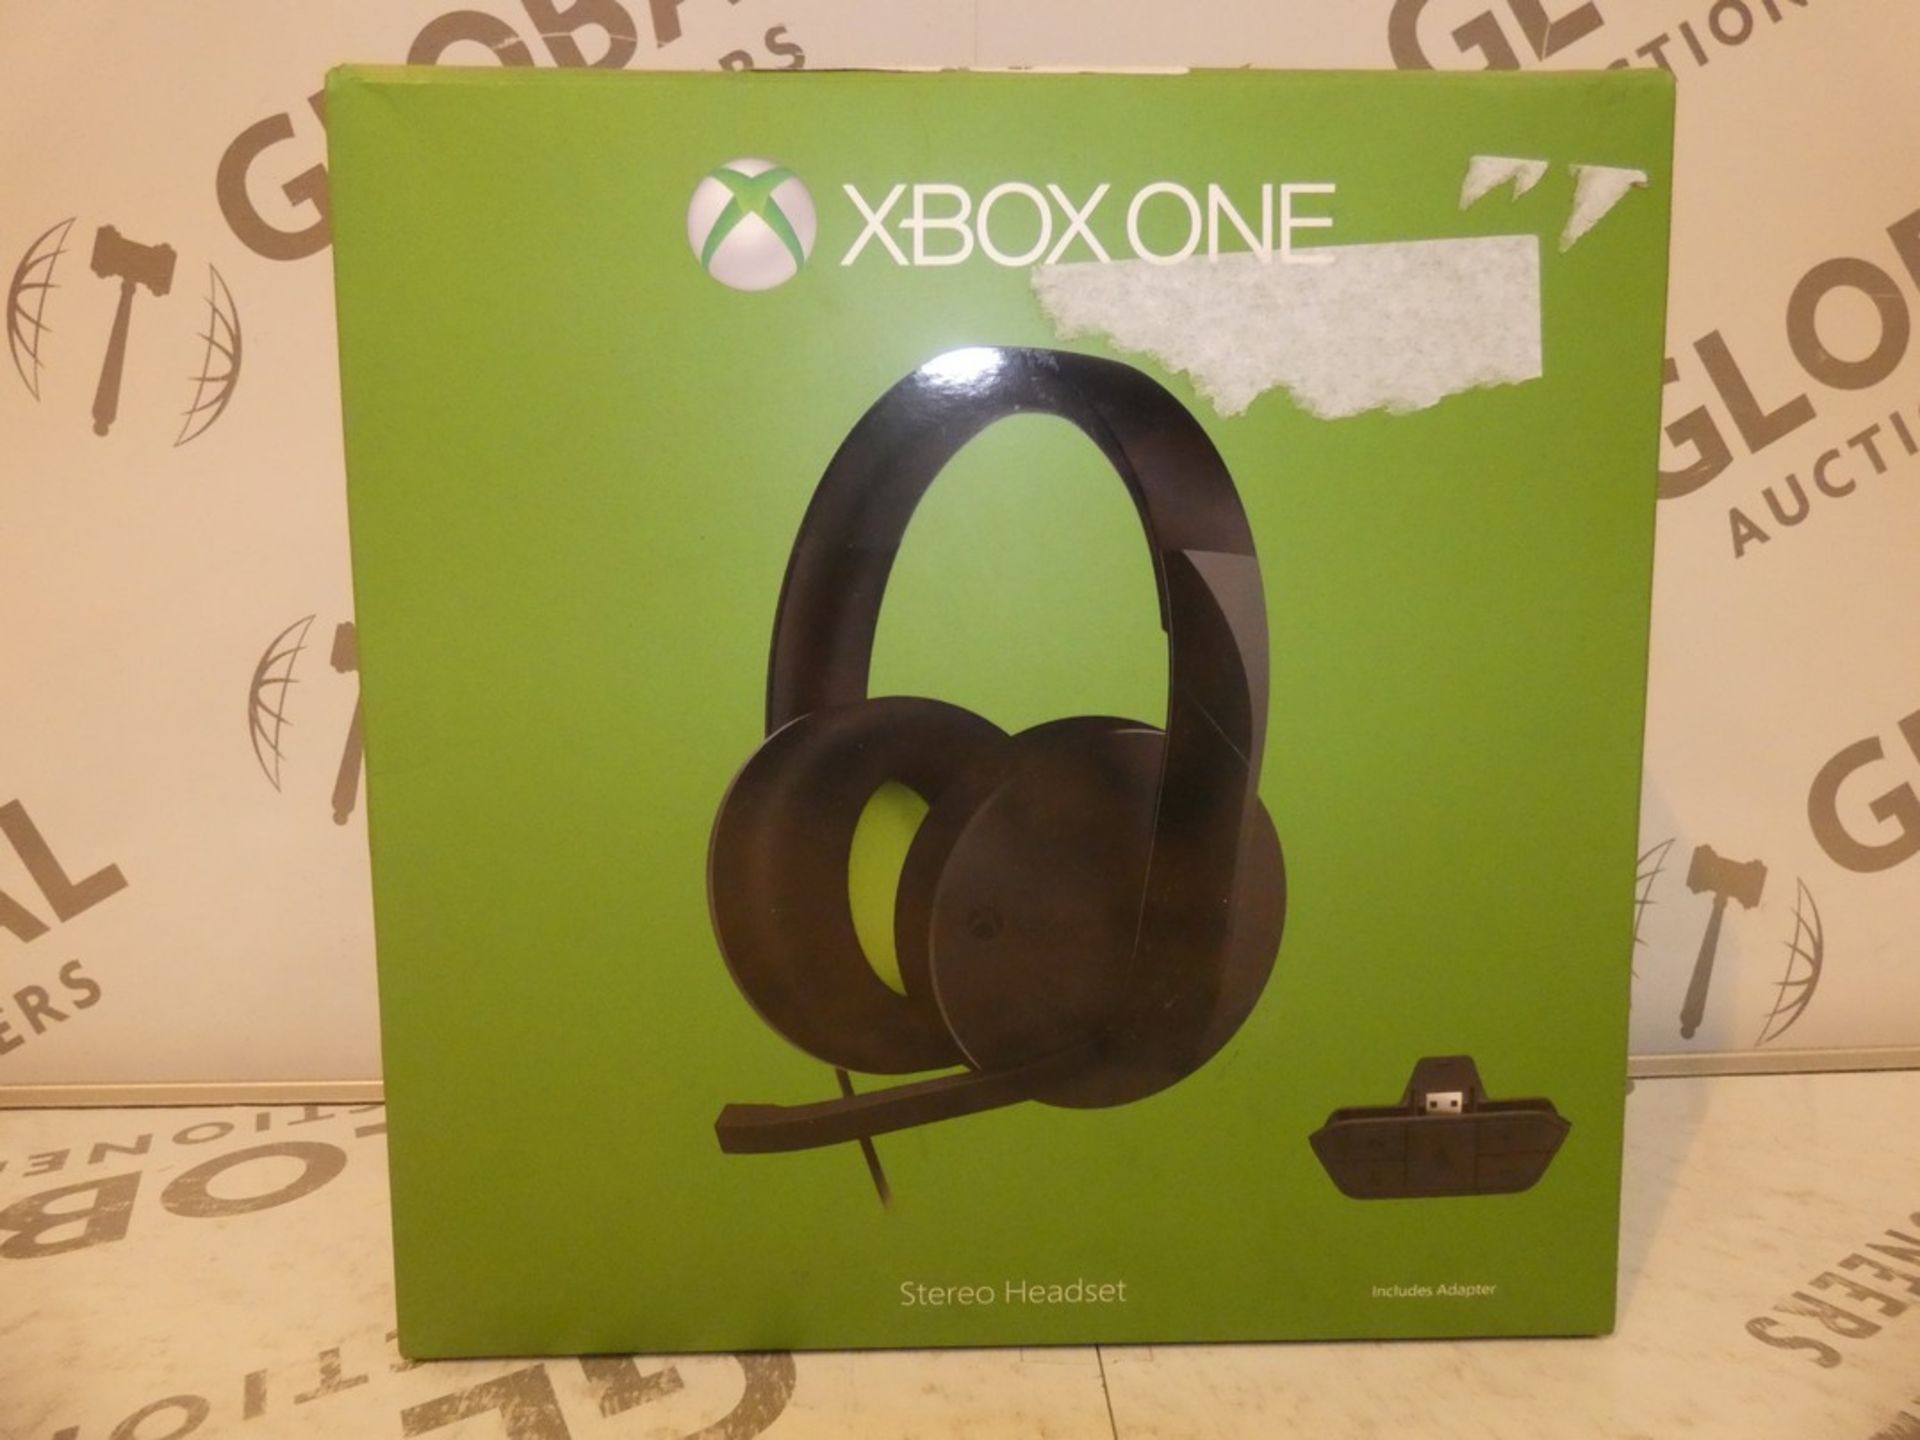 Lot To Contain 3 Boxed Xbox One Stereo Headsets To Include Adapter